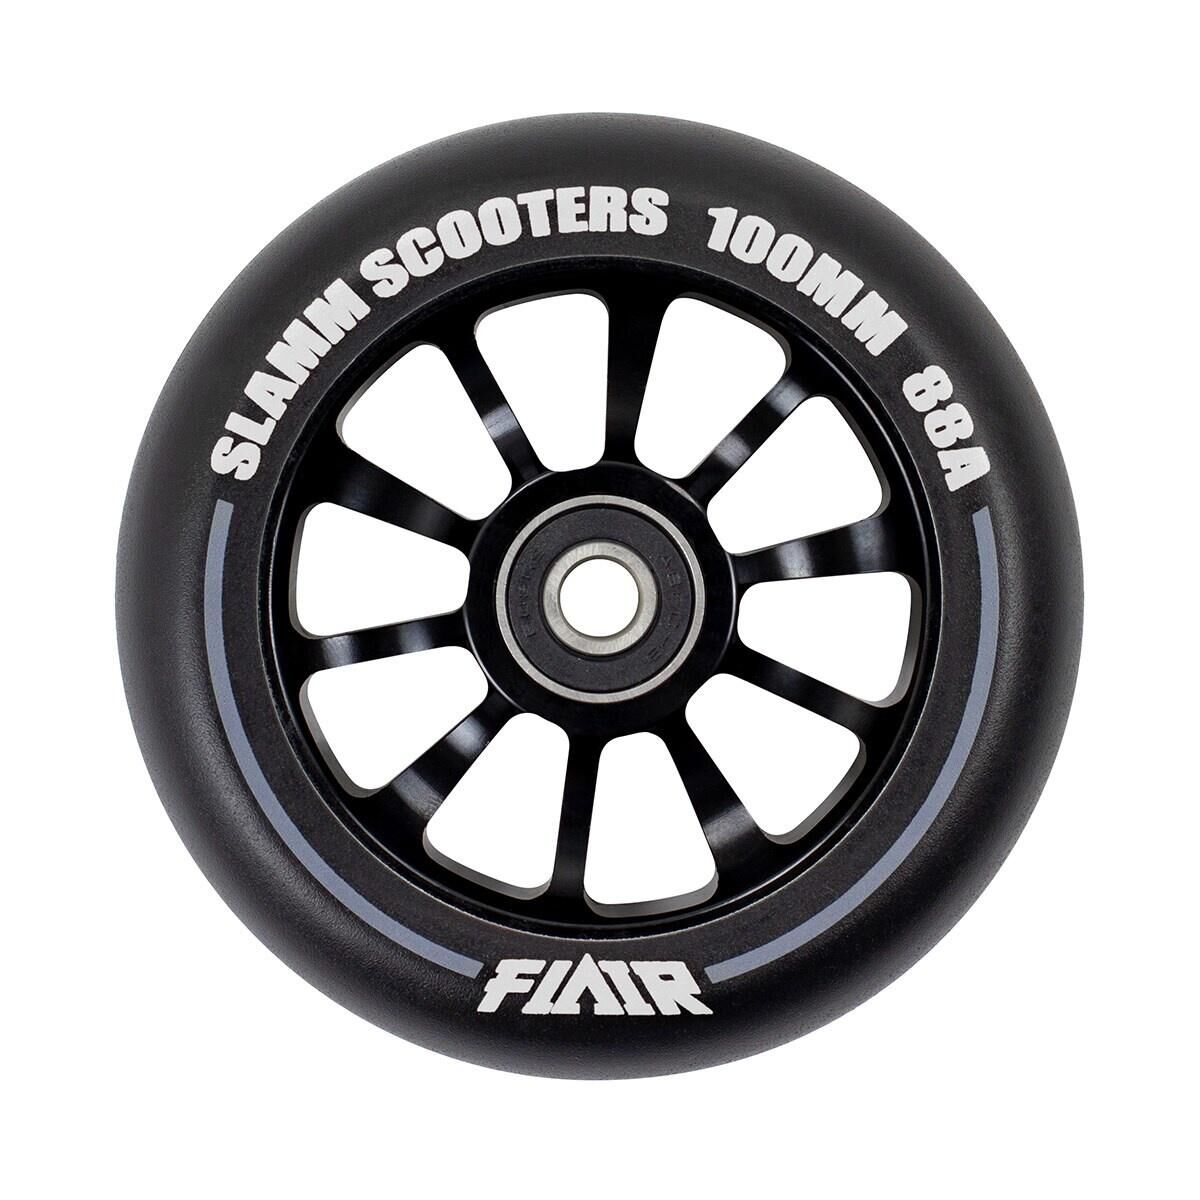 SLAMM Flair 2.0 100mm Alloy Core Scooter Wheel and Bearings